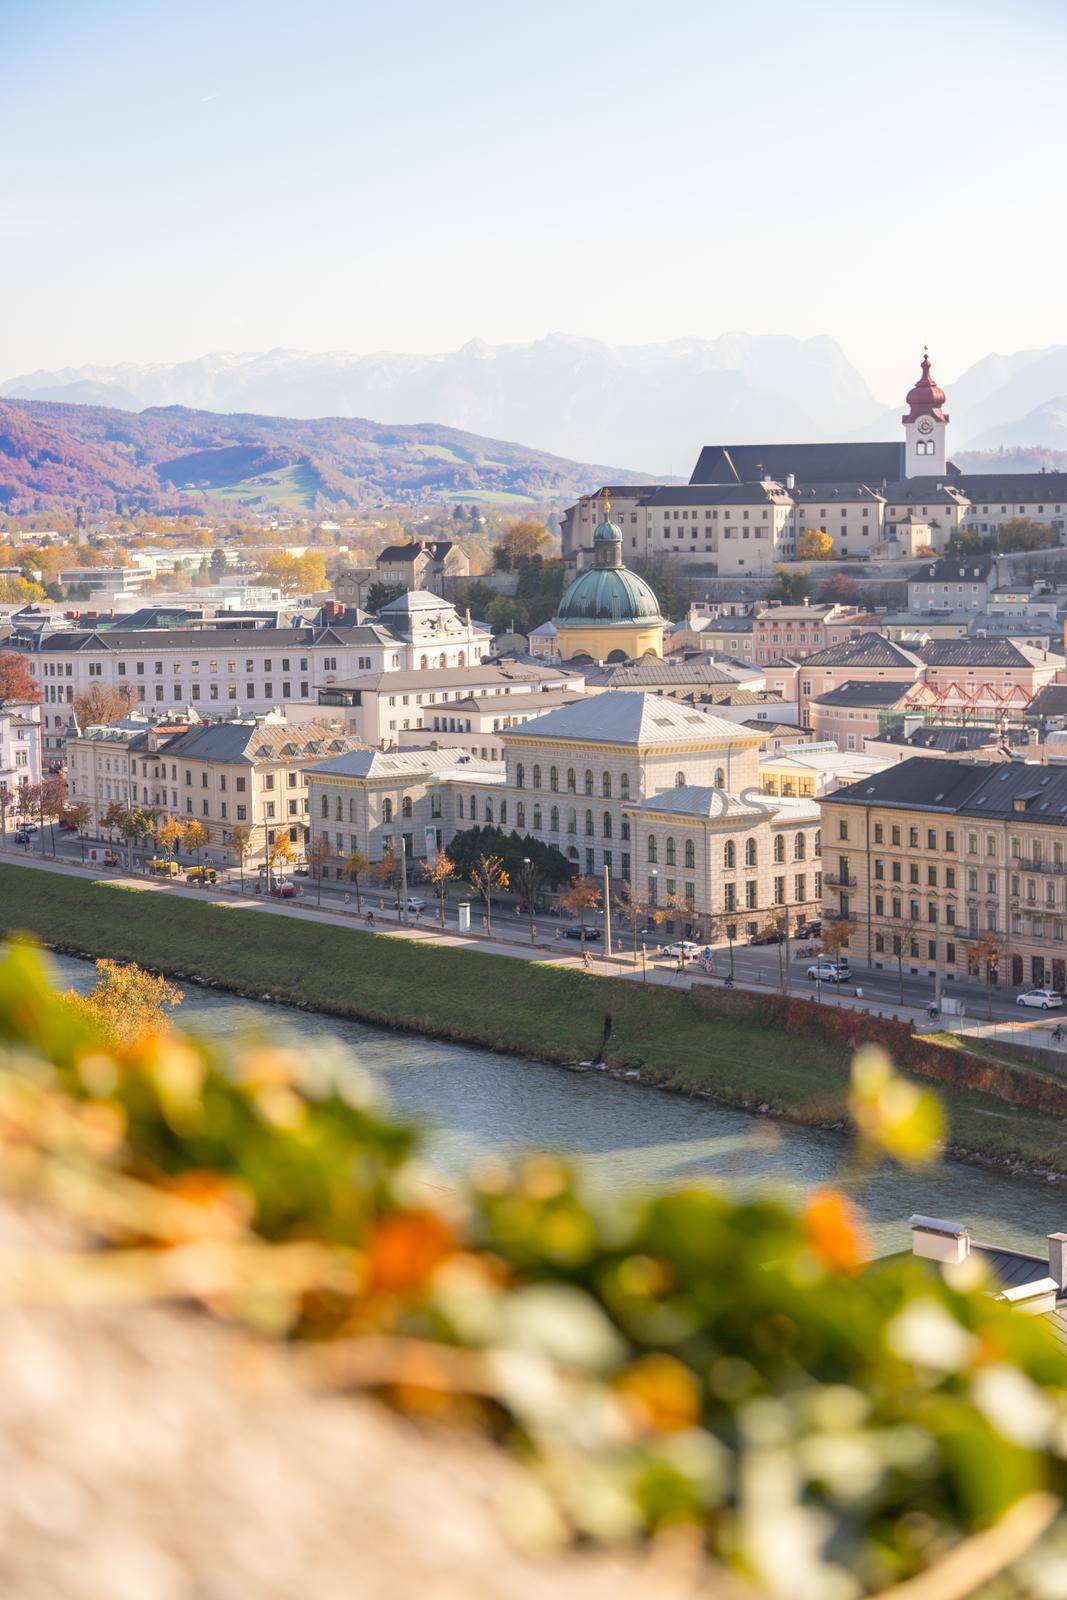 Salzburg historic district at autumn time, colorful leaves and colors with sunshine, Austria